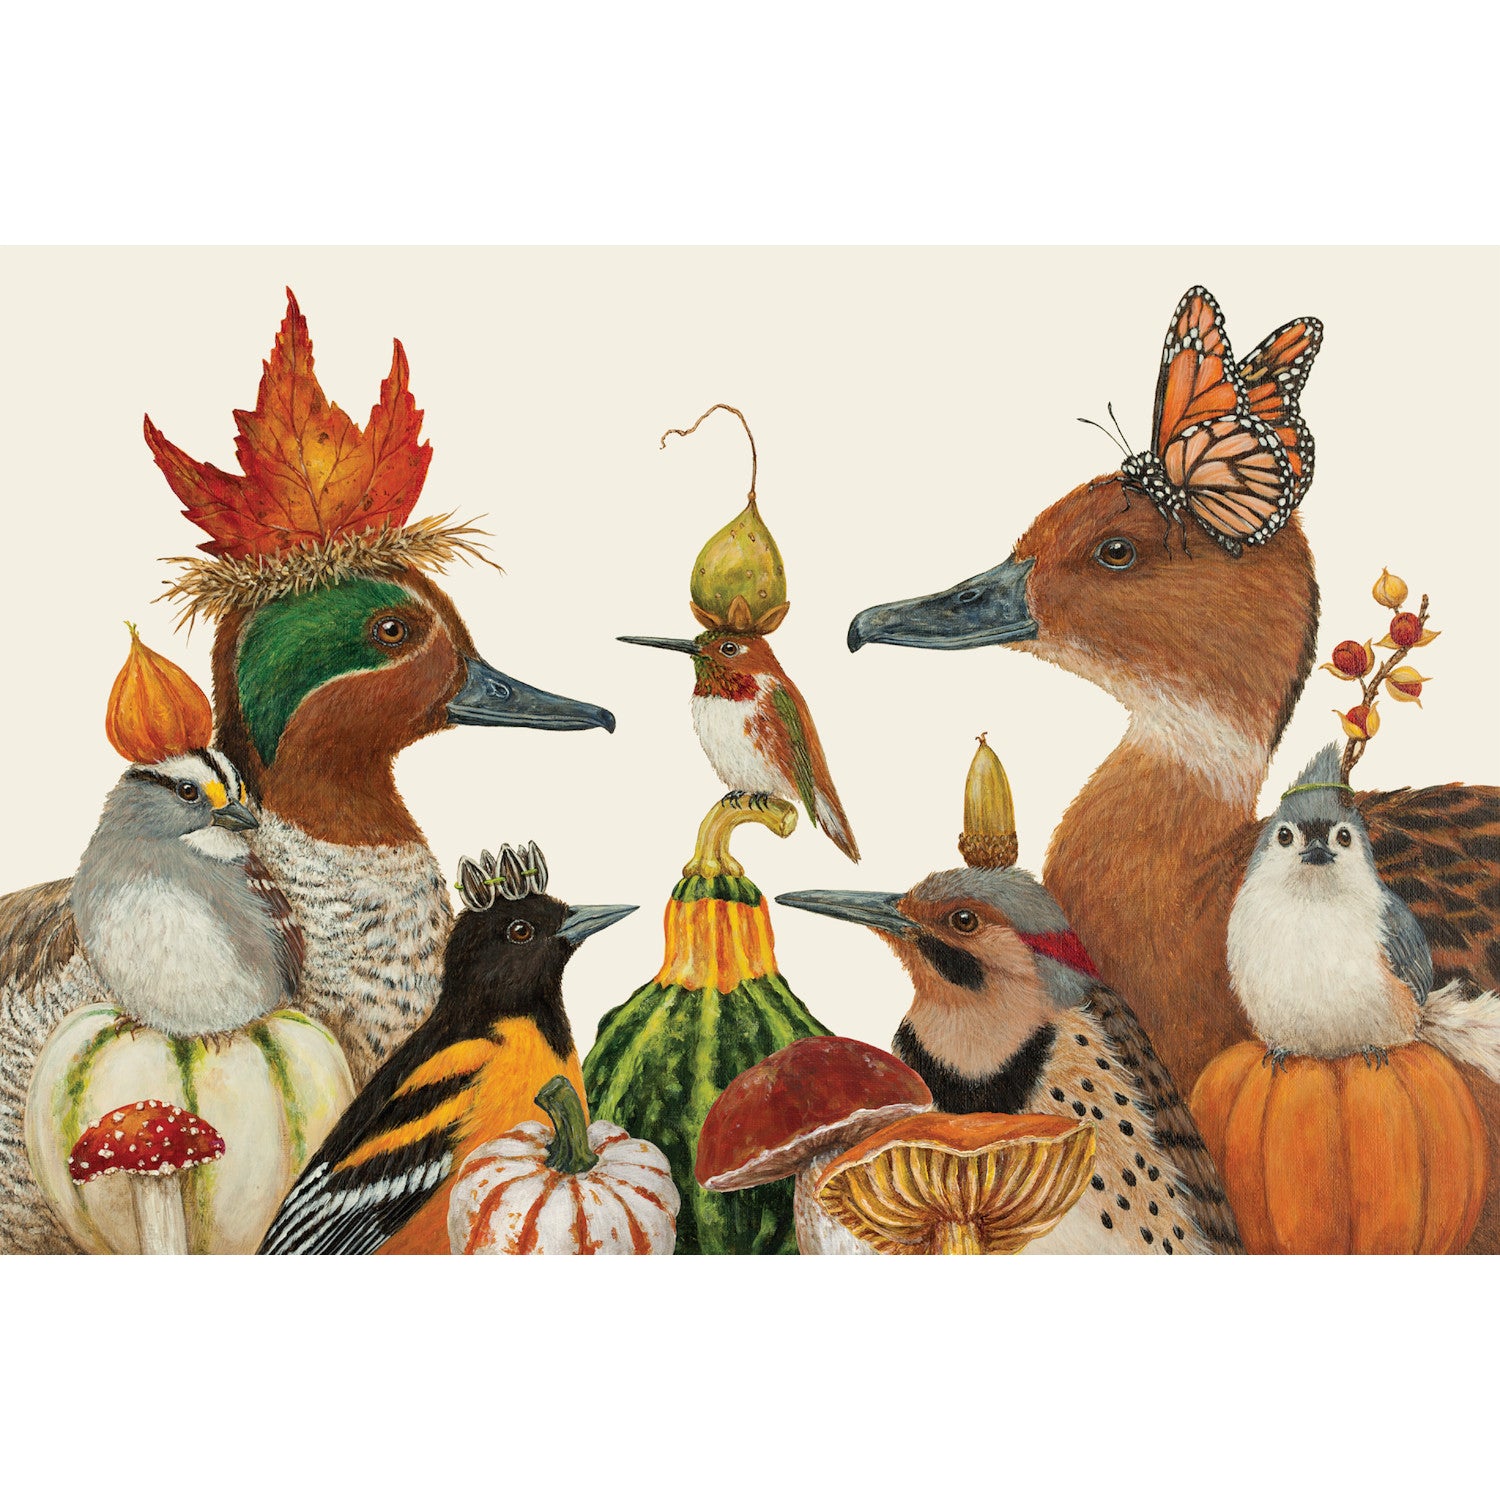 A realistic illustration of seven various birds, ranging in size from hummingbird to ducks, surrounded by mushrooms and gourds, each with a headdress of fall foliage, on a white background.